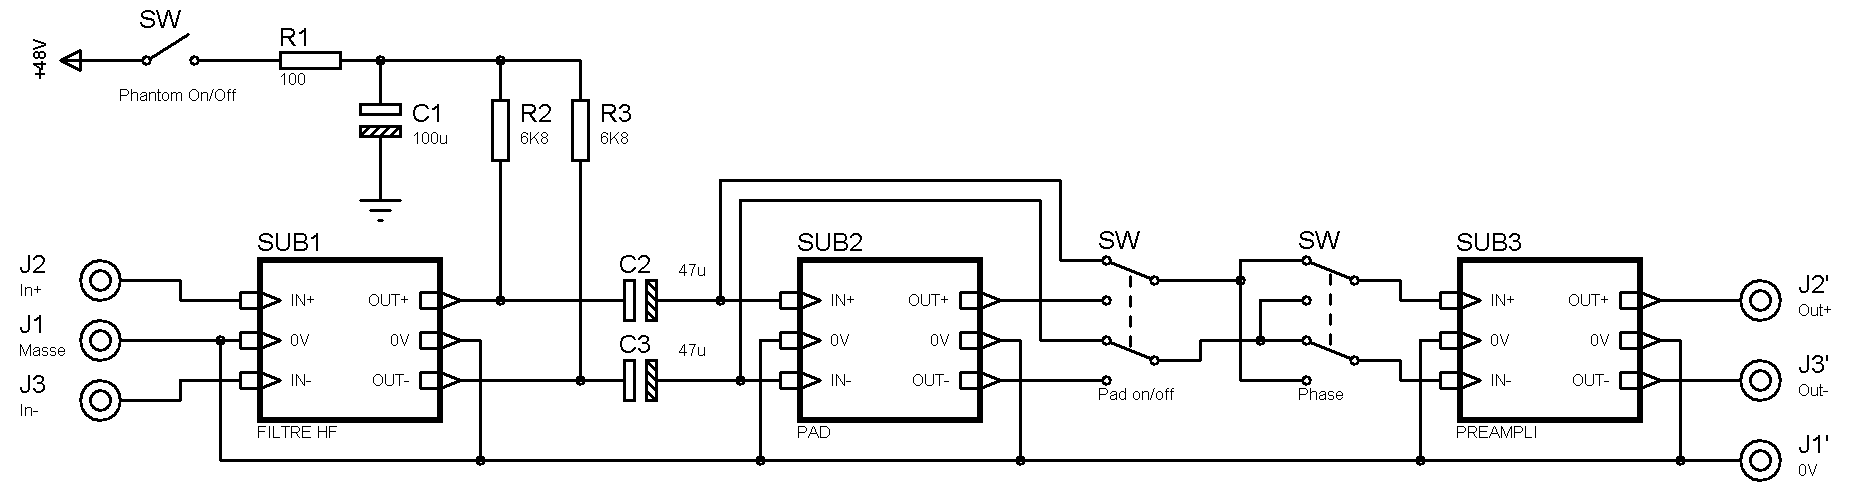 Preamp Syno general